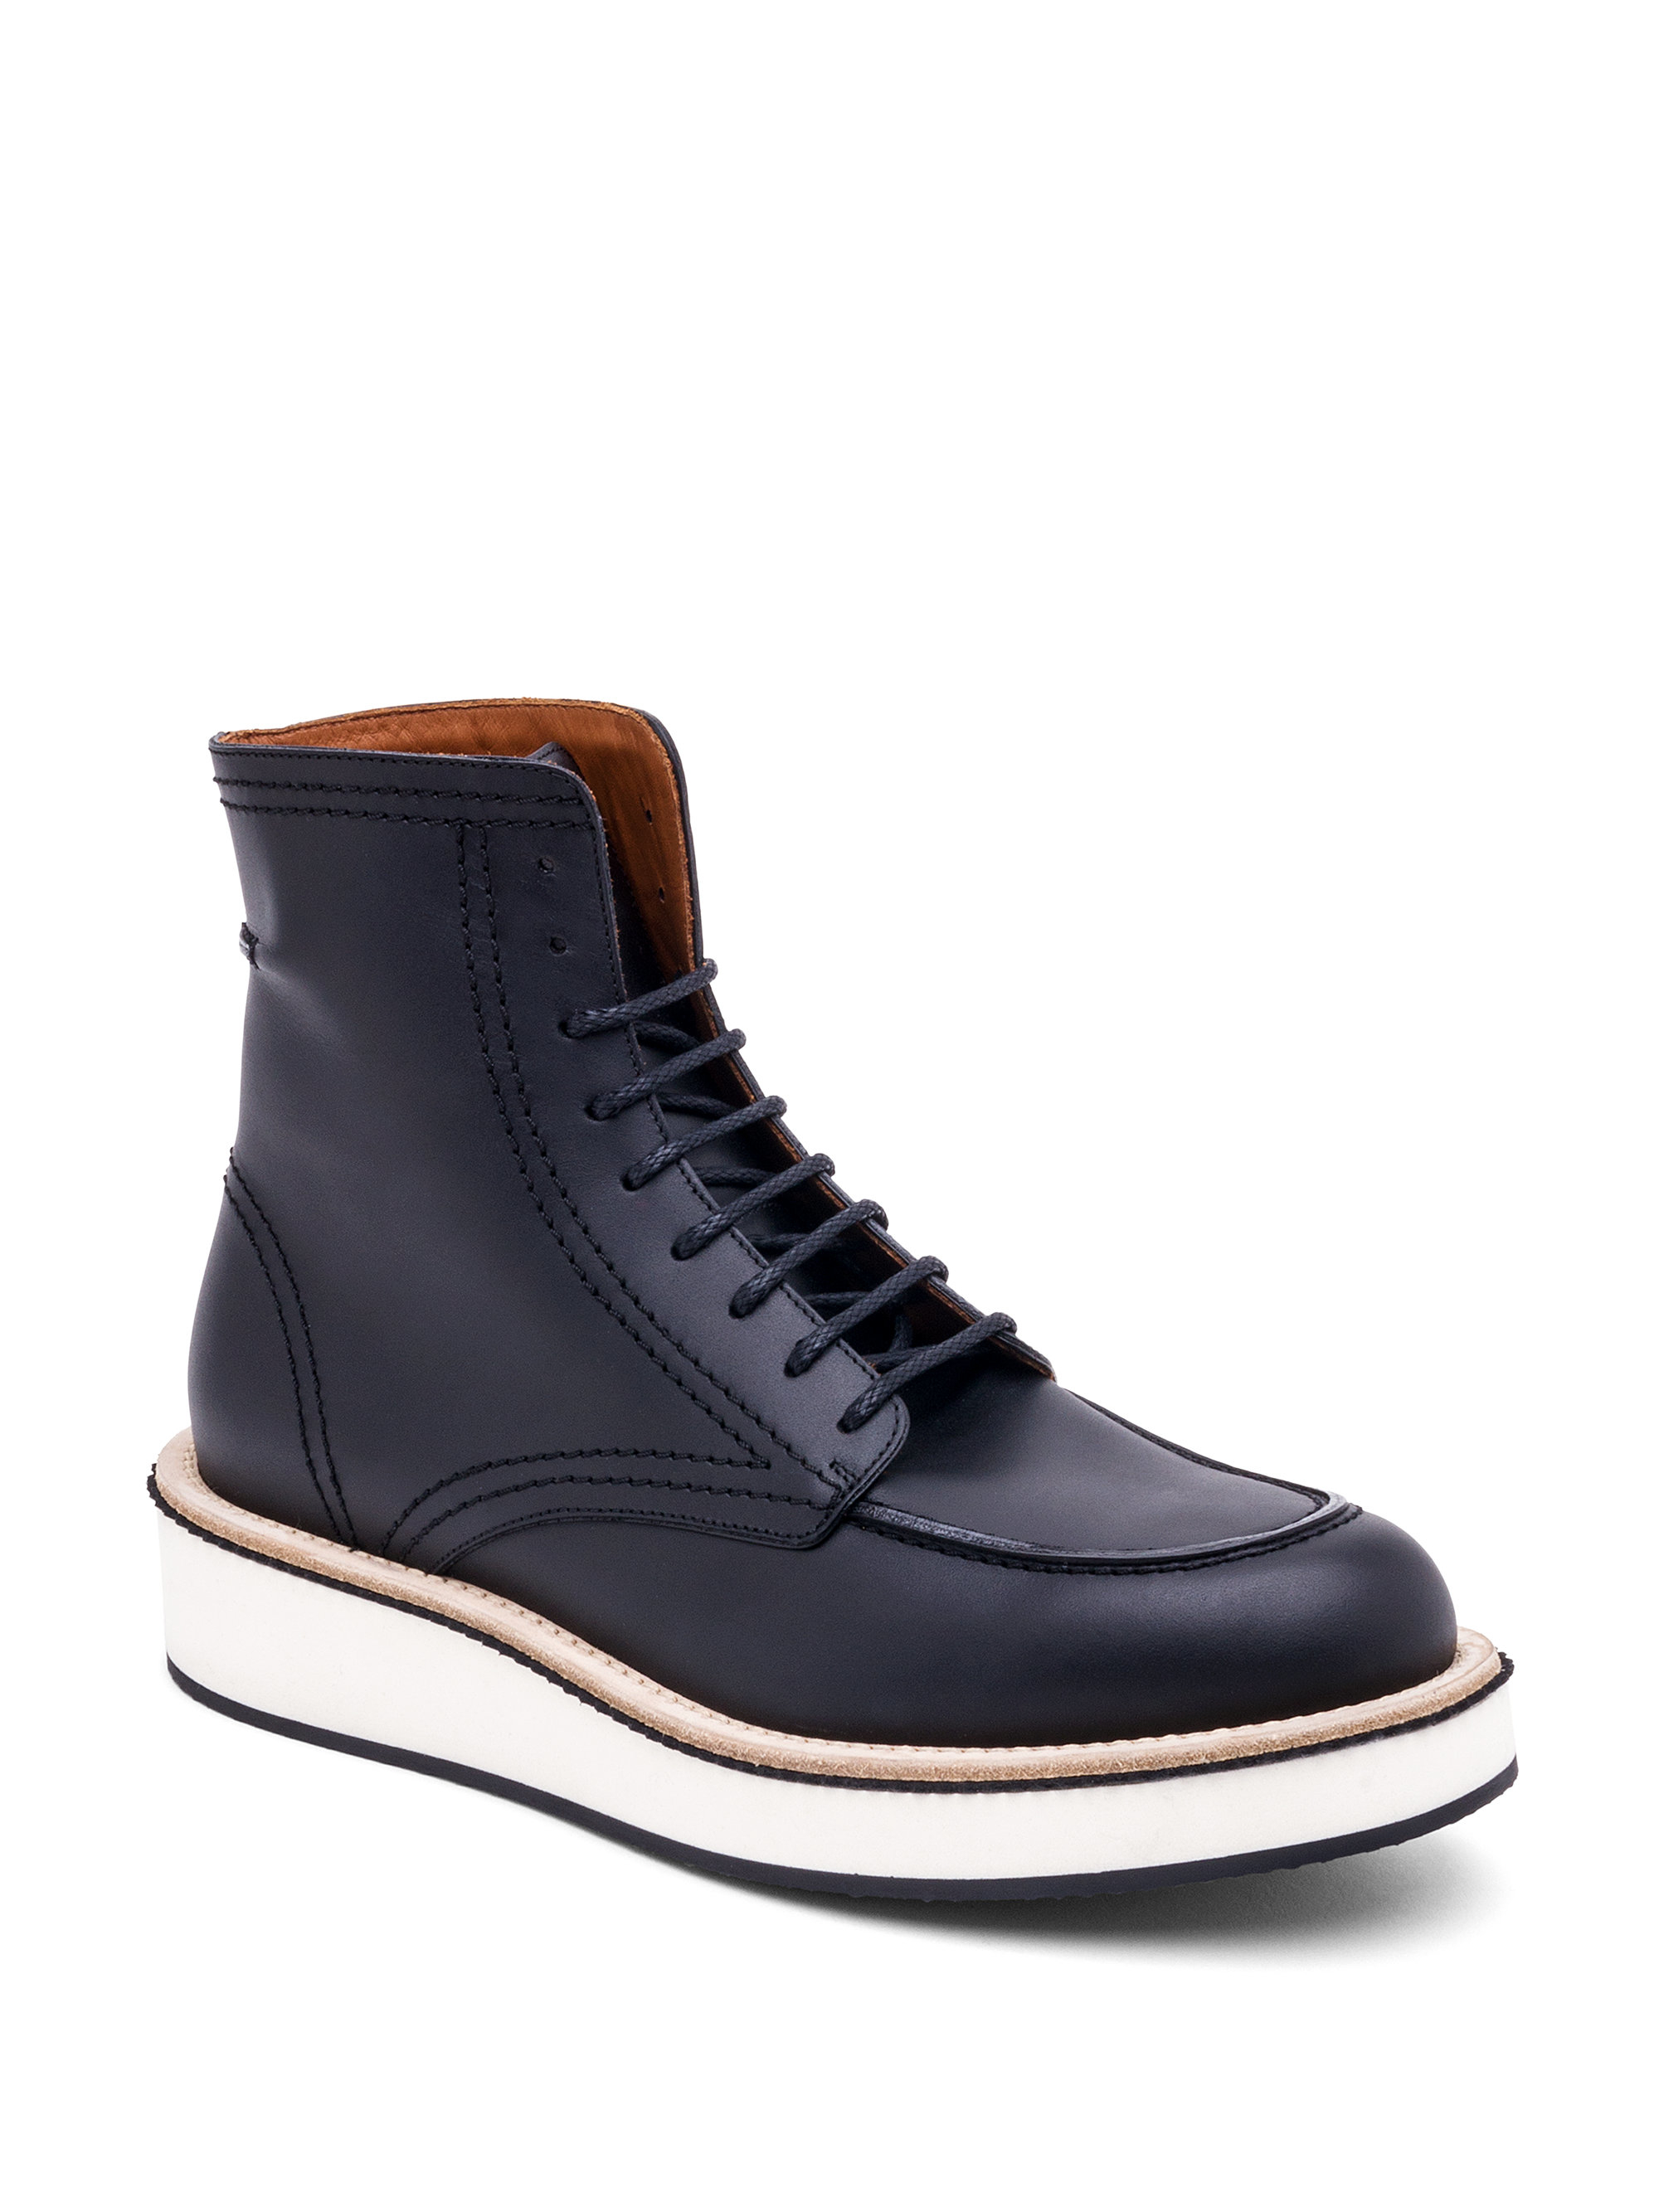 Givenchy Rottweiler Philippo Leather Ankle Boots in Black for Men - Lyst